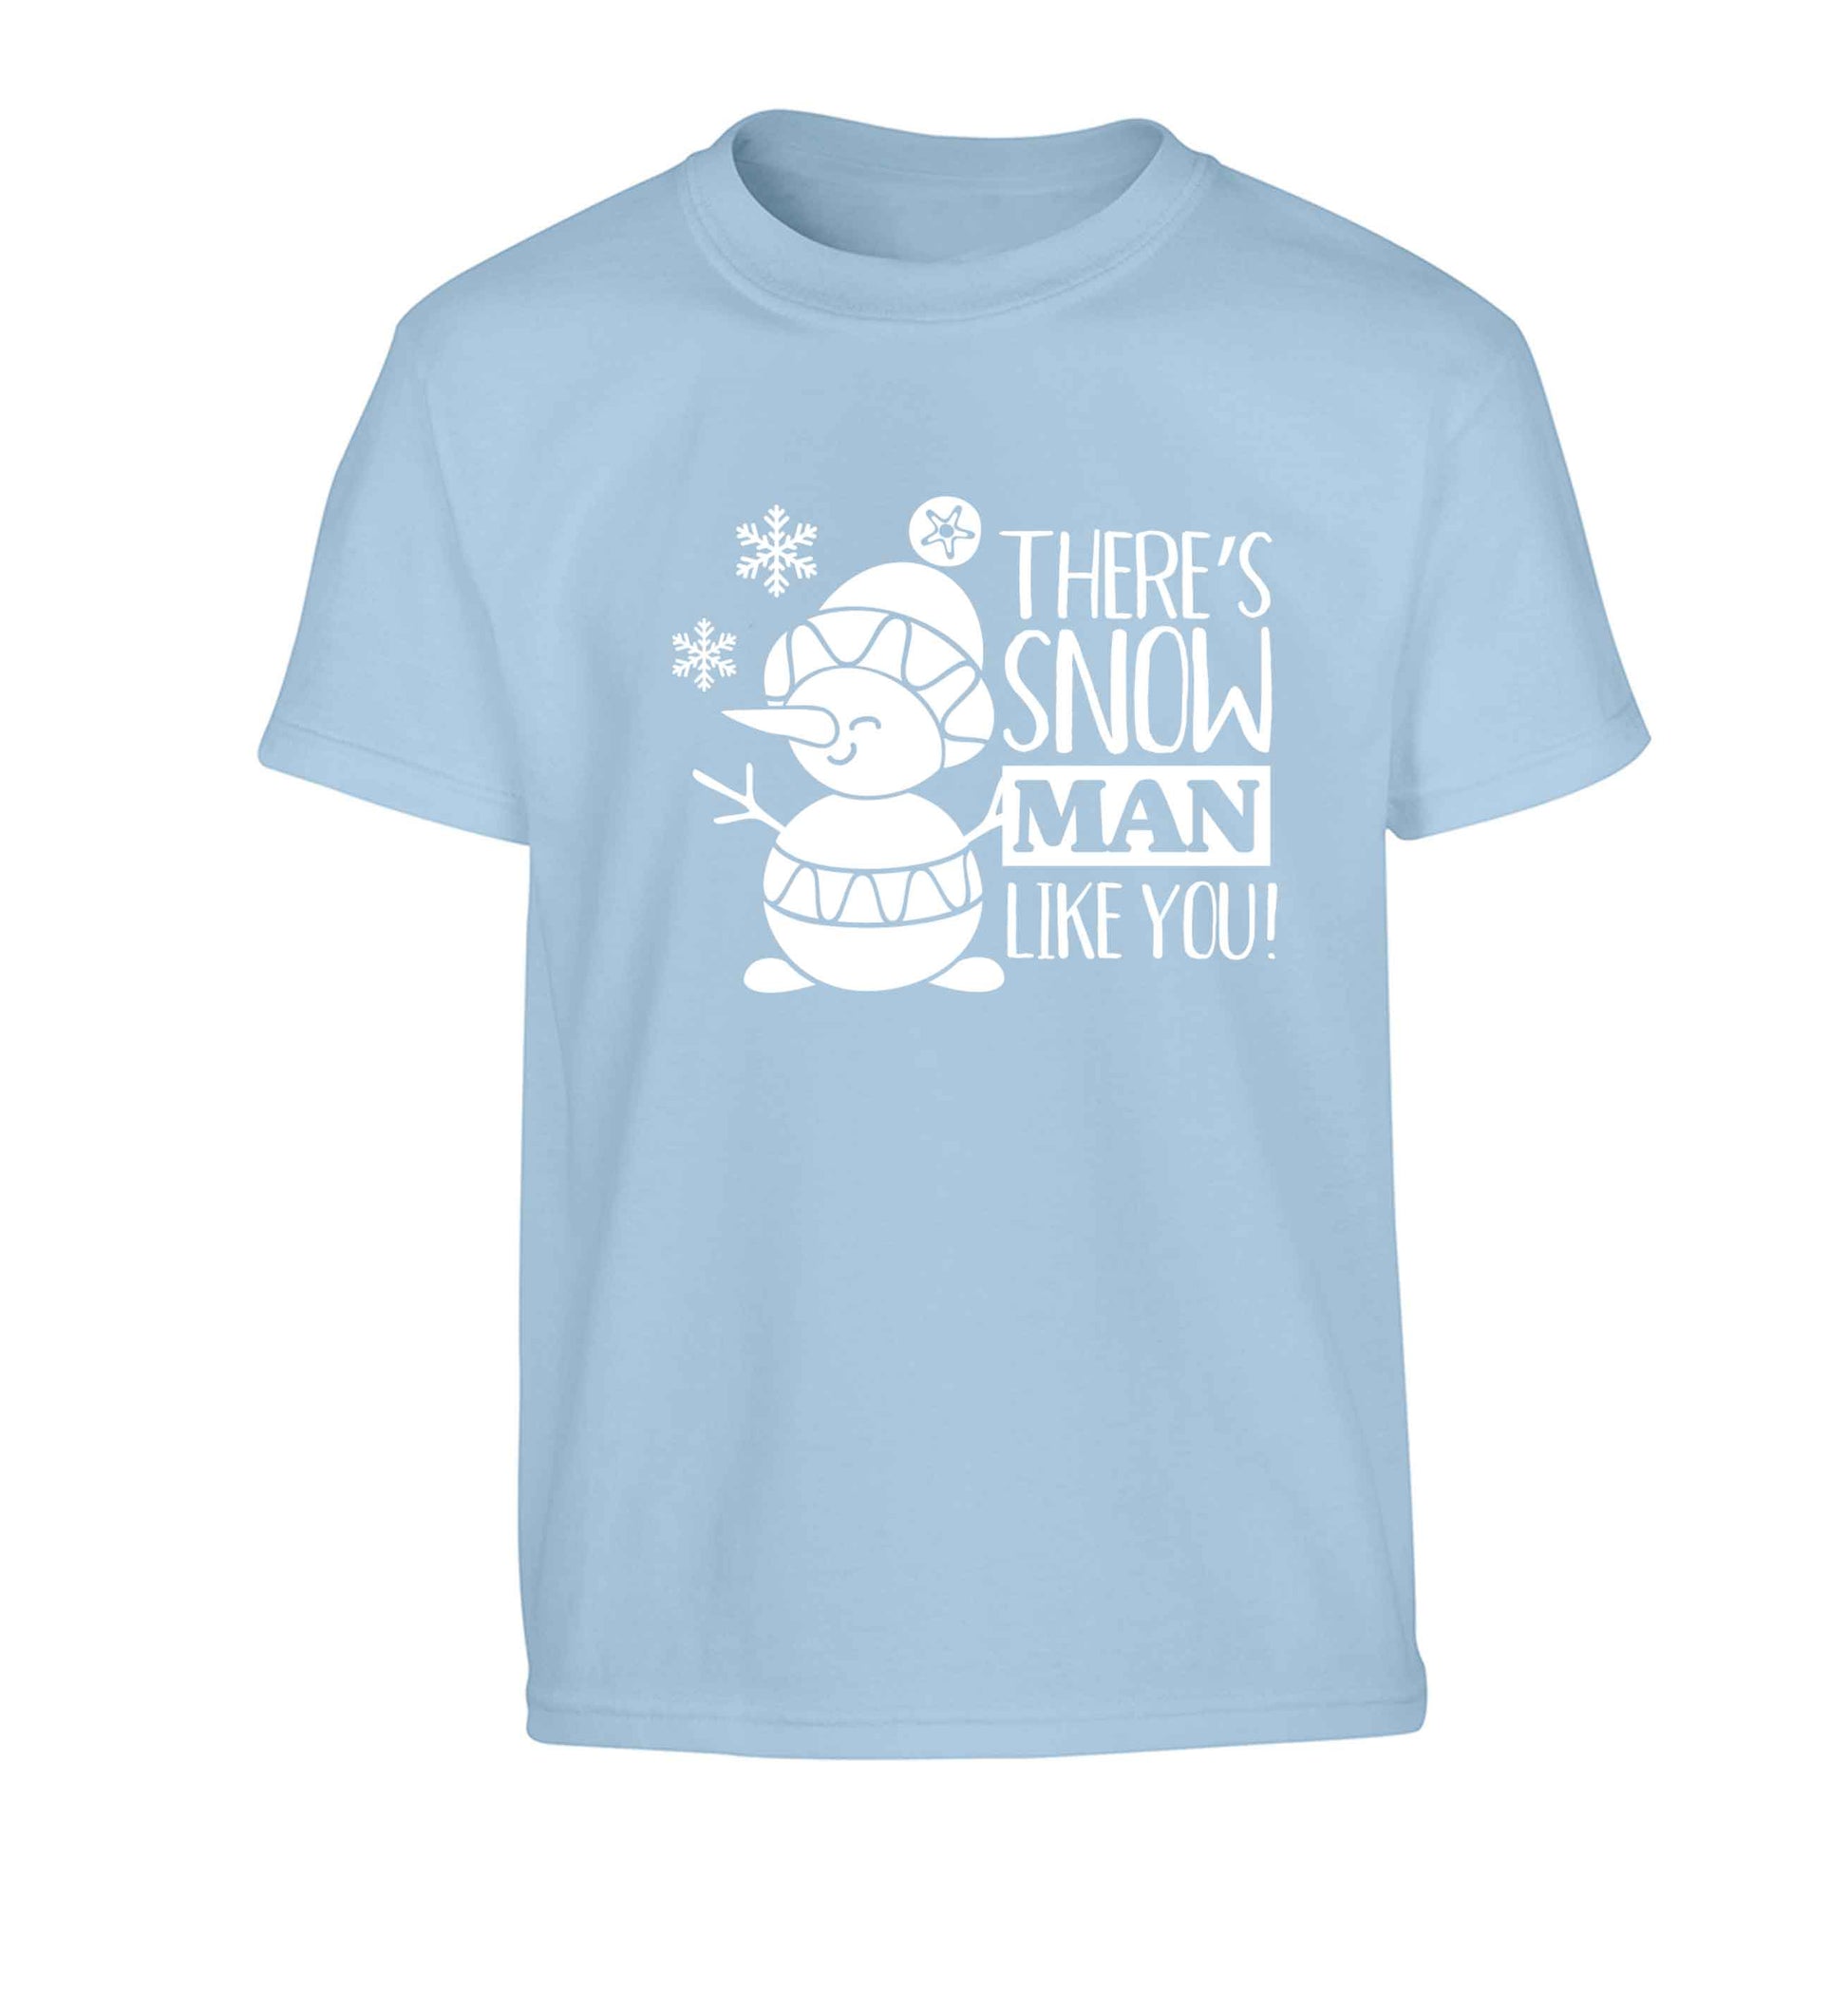 There's snow man like you Children's light blue Tshirt 12-13 Years